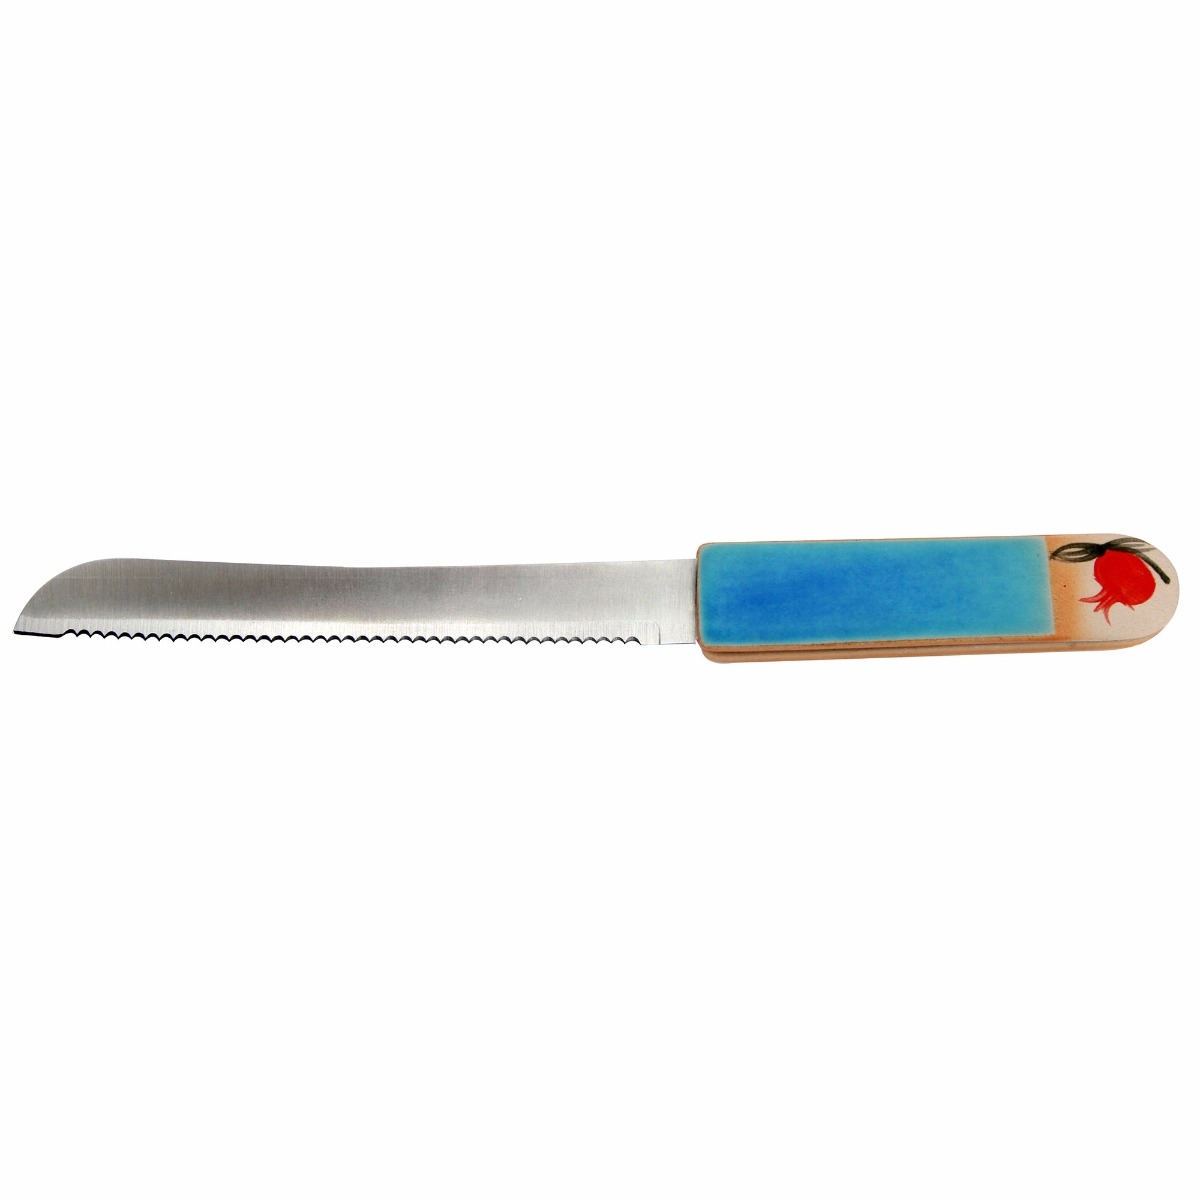 Ceramic and Stainless Steel Challah Knife with Turquoise Handle and Pomegranate - 1